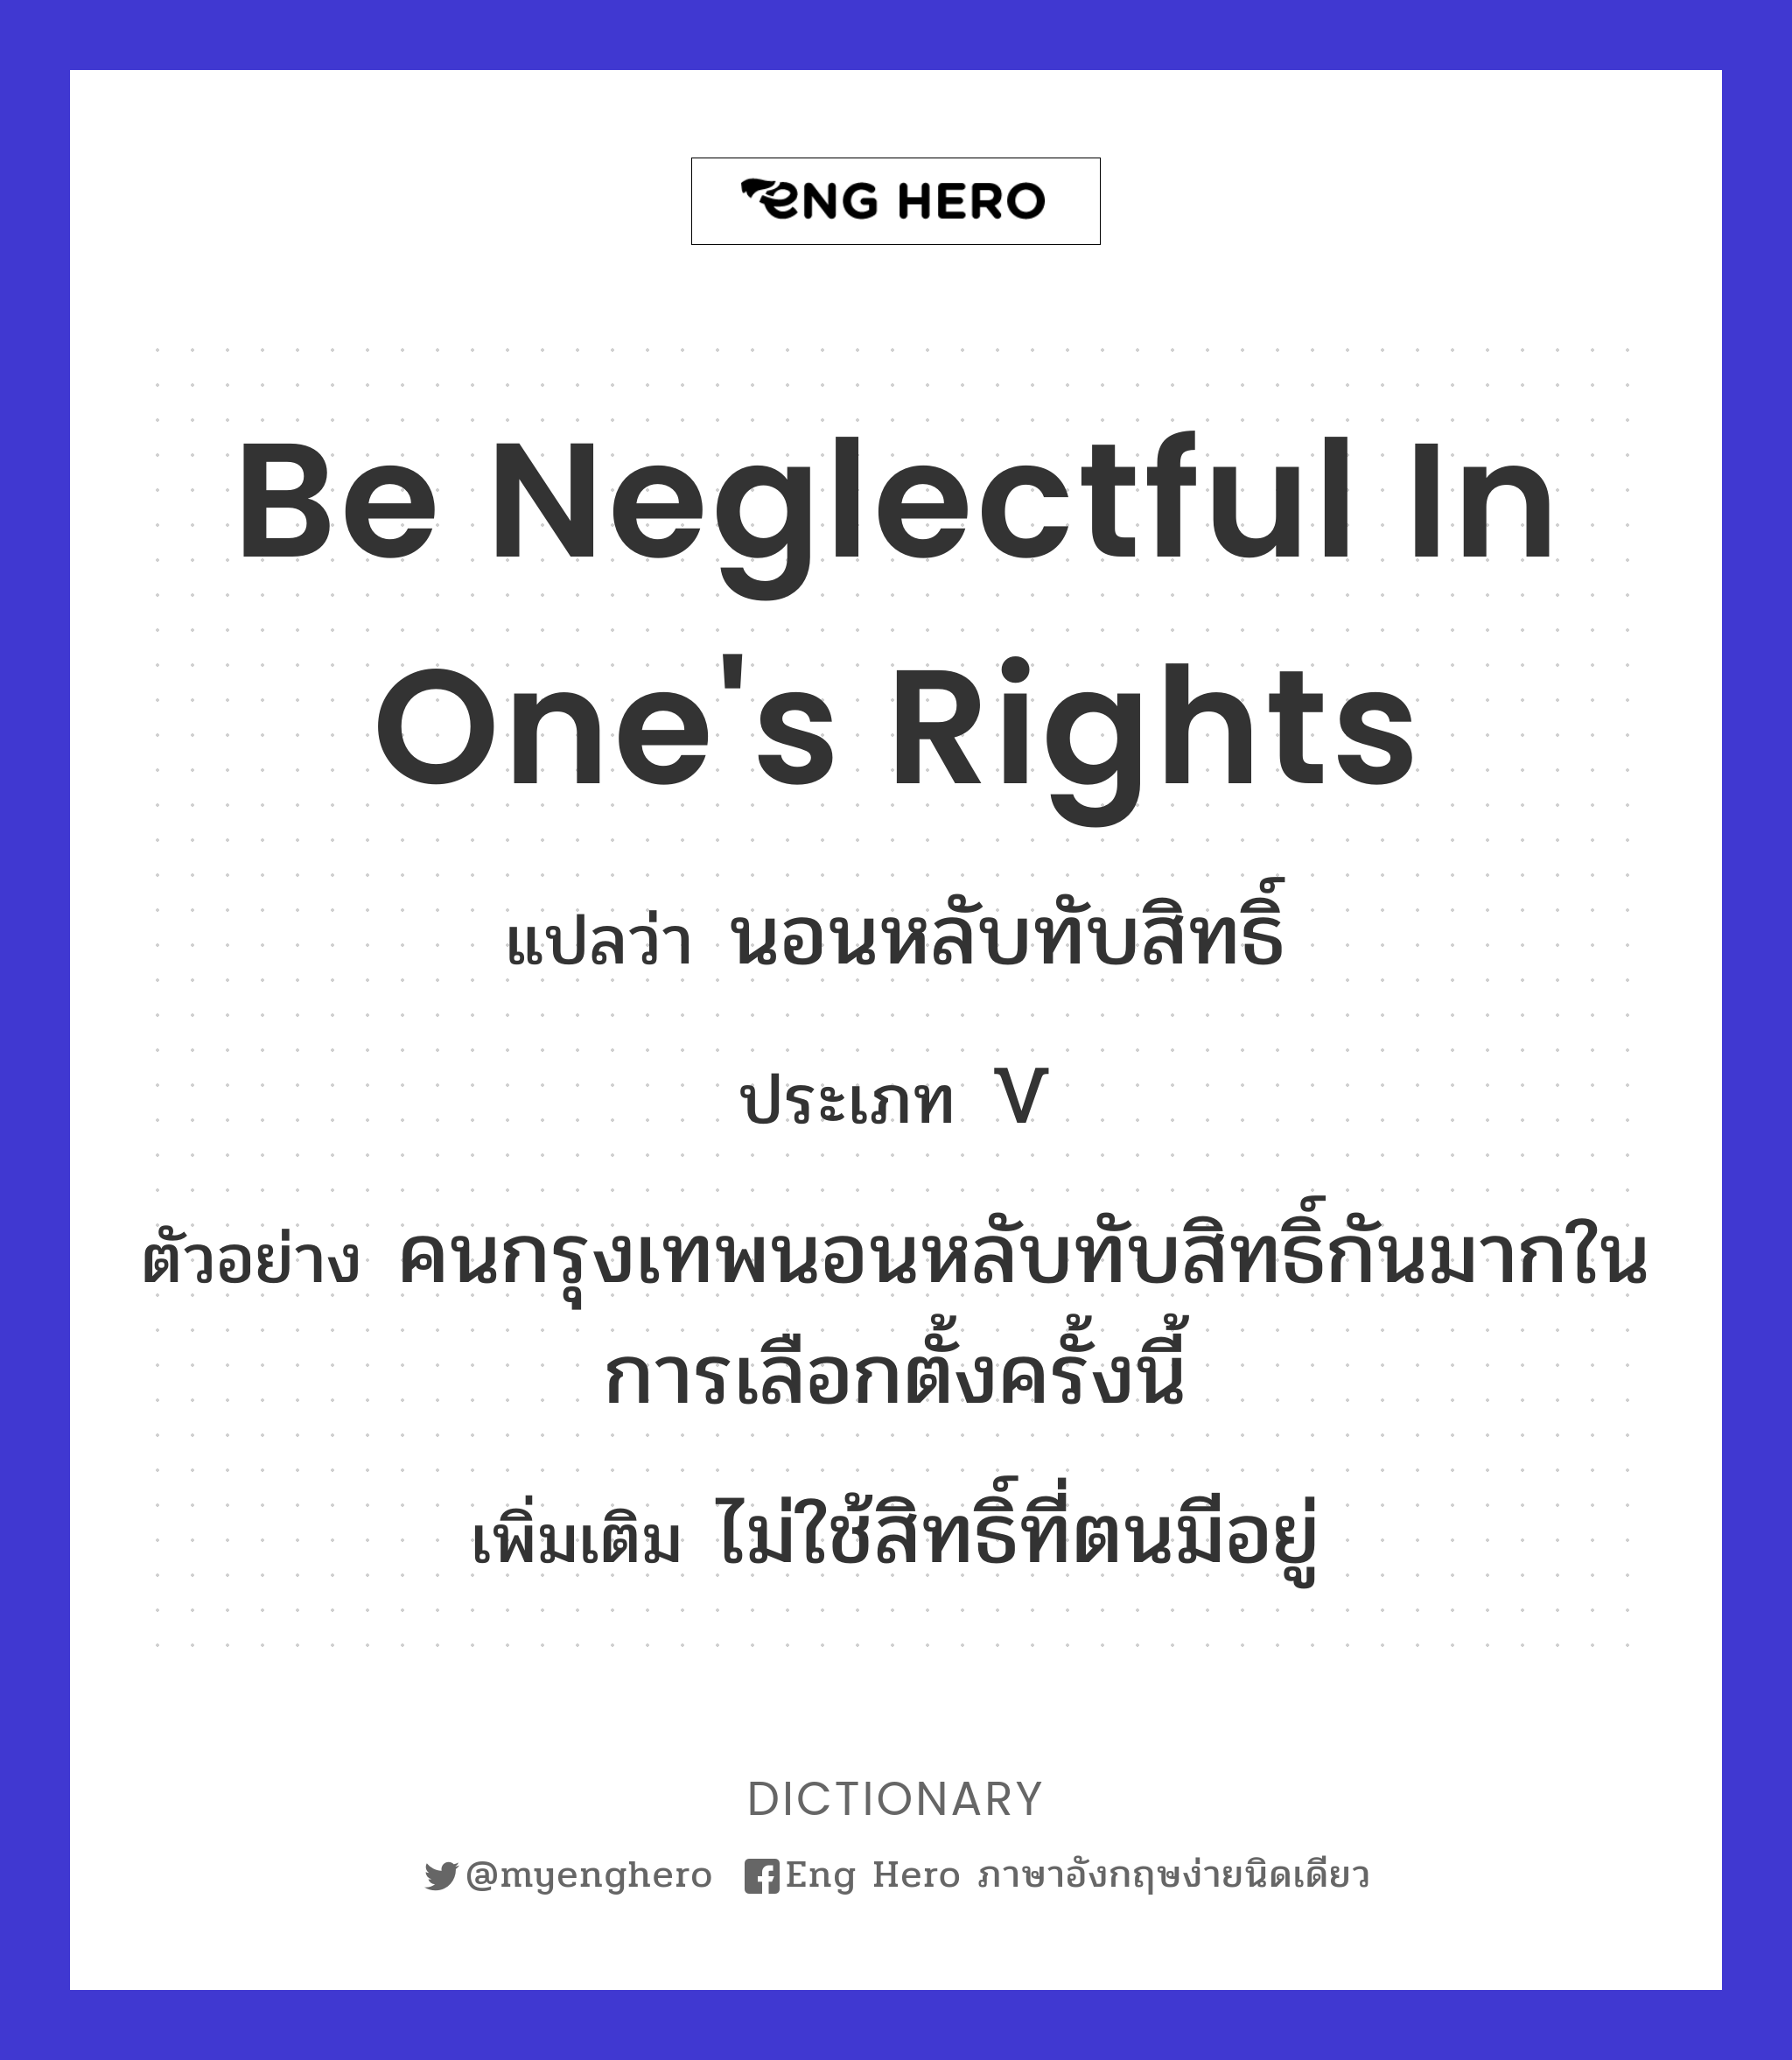 be neglectful in one's rights